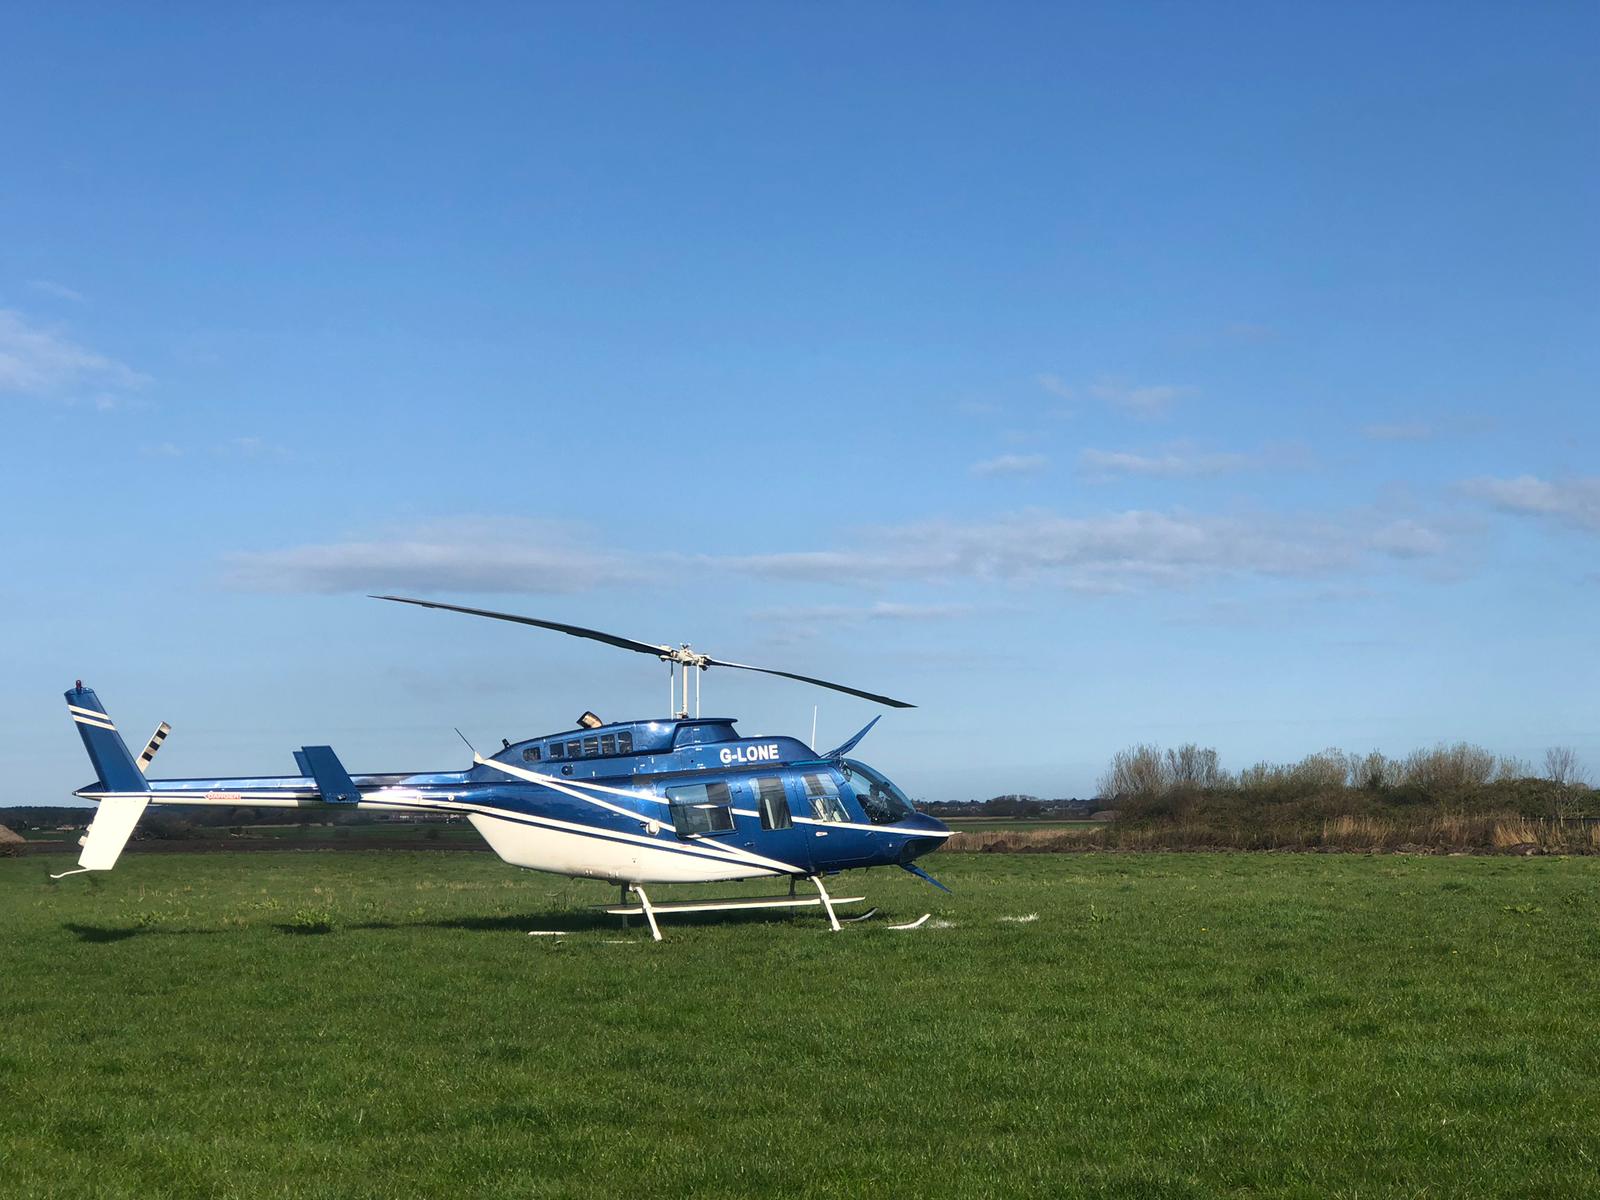 10 Minute Helicopter Flight in Lancashire Experience from flydays.co.uk